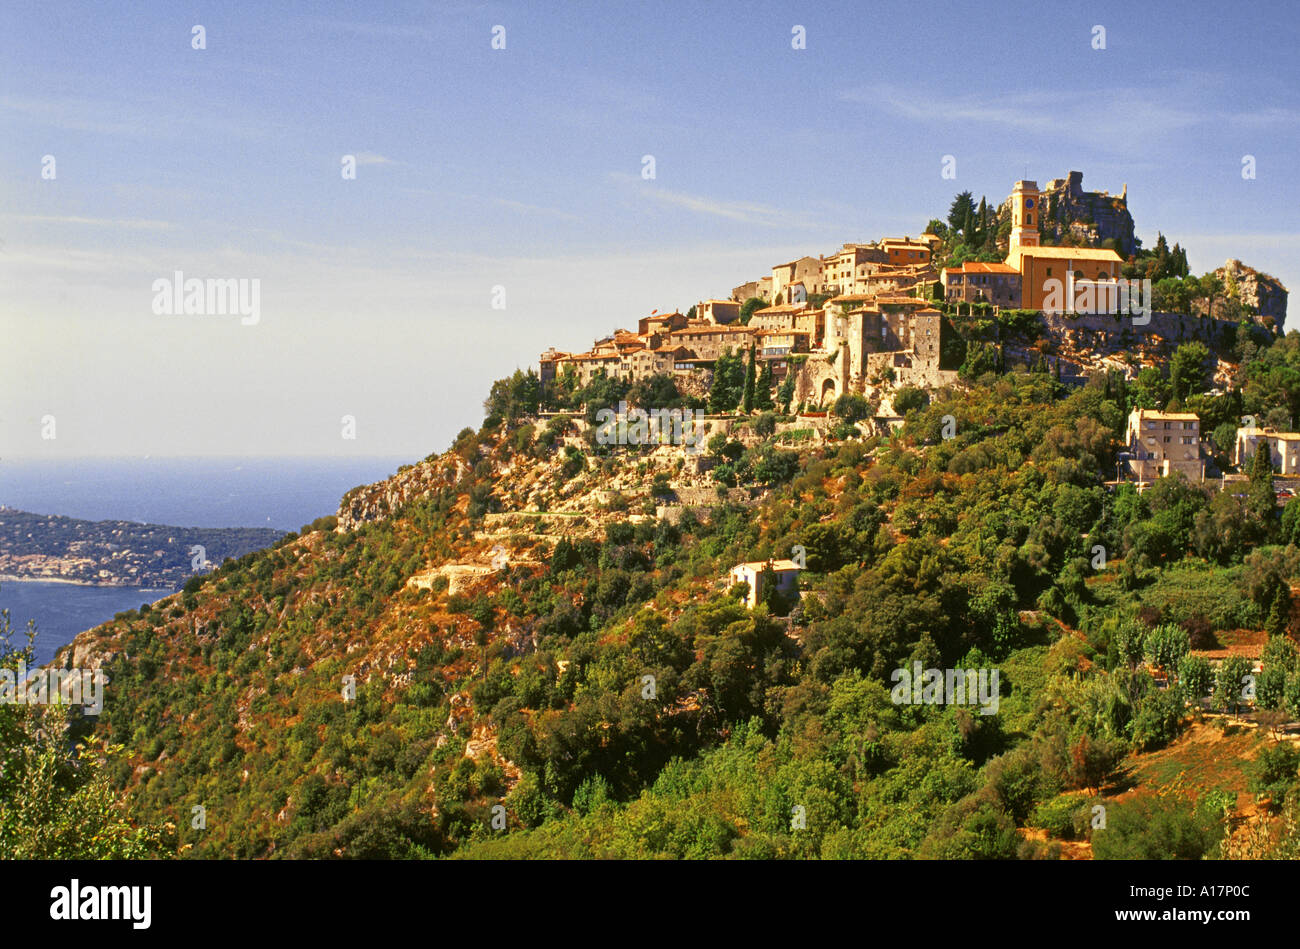 france riviera medieval village of EZE provence cote d azur french ...